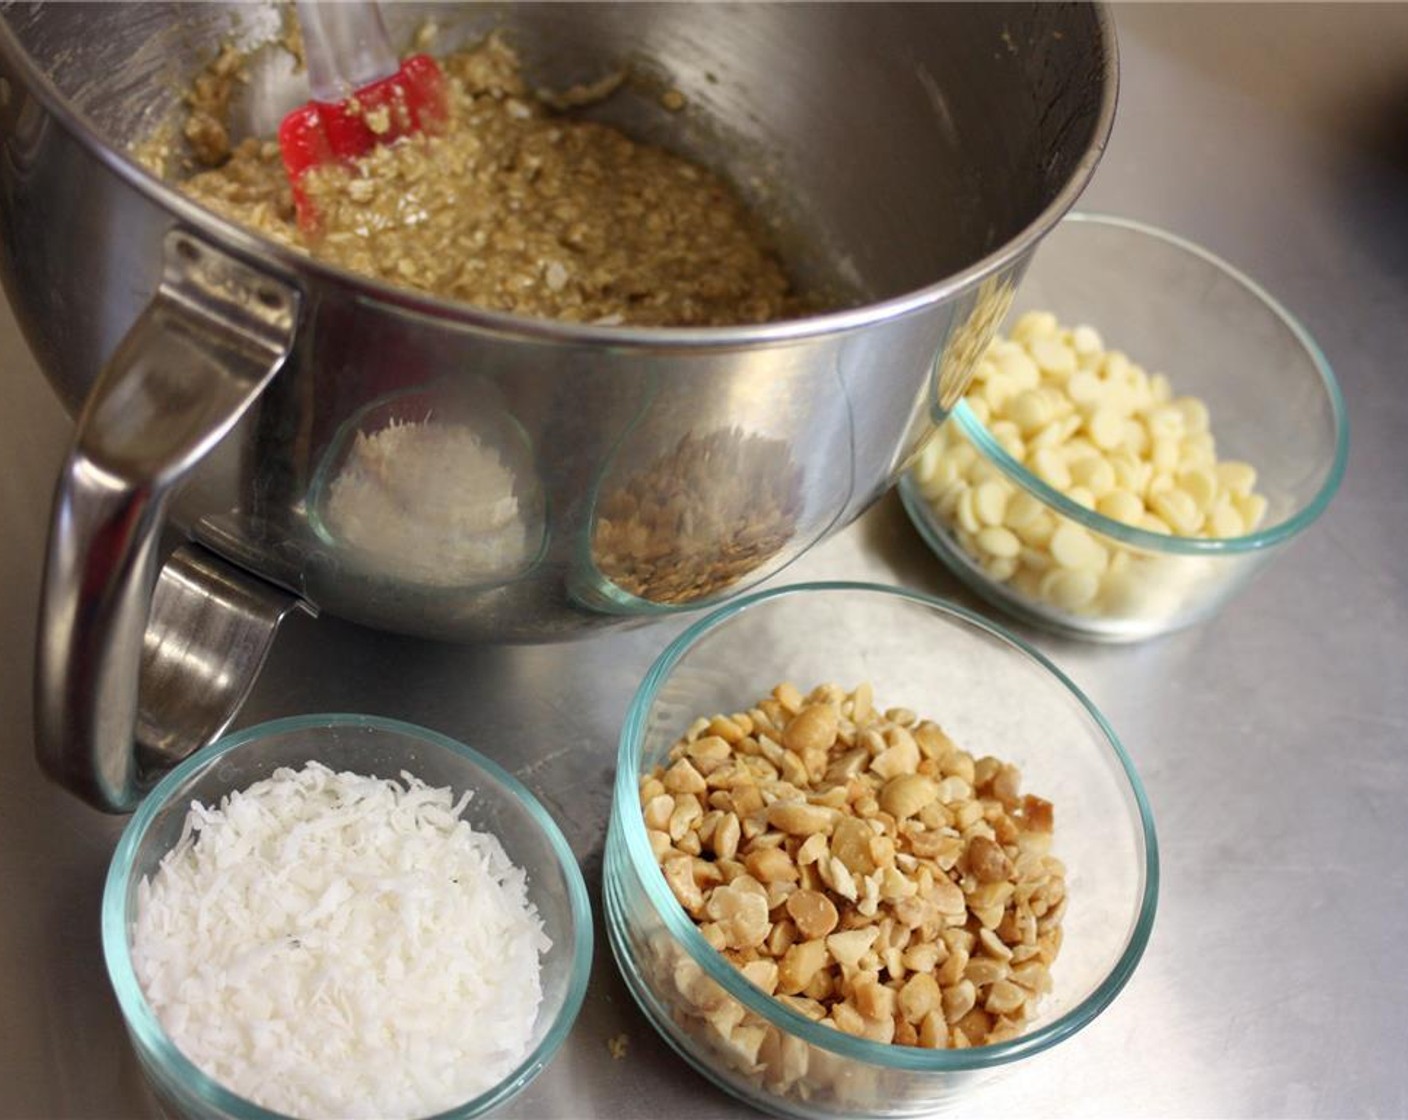 step 6 Add flour mixture to the wet in two batches and mix by hand using a rubber spatula. Fold in Vegan White Chocolate Chips (3/4 cup), Macadamia Nuts and Sweetened Coconut Flakes (3/4 cup). Mix all the ingredients well.